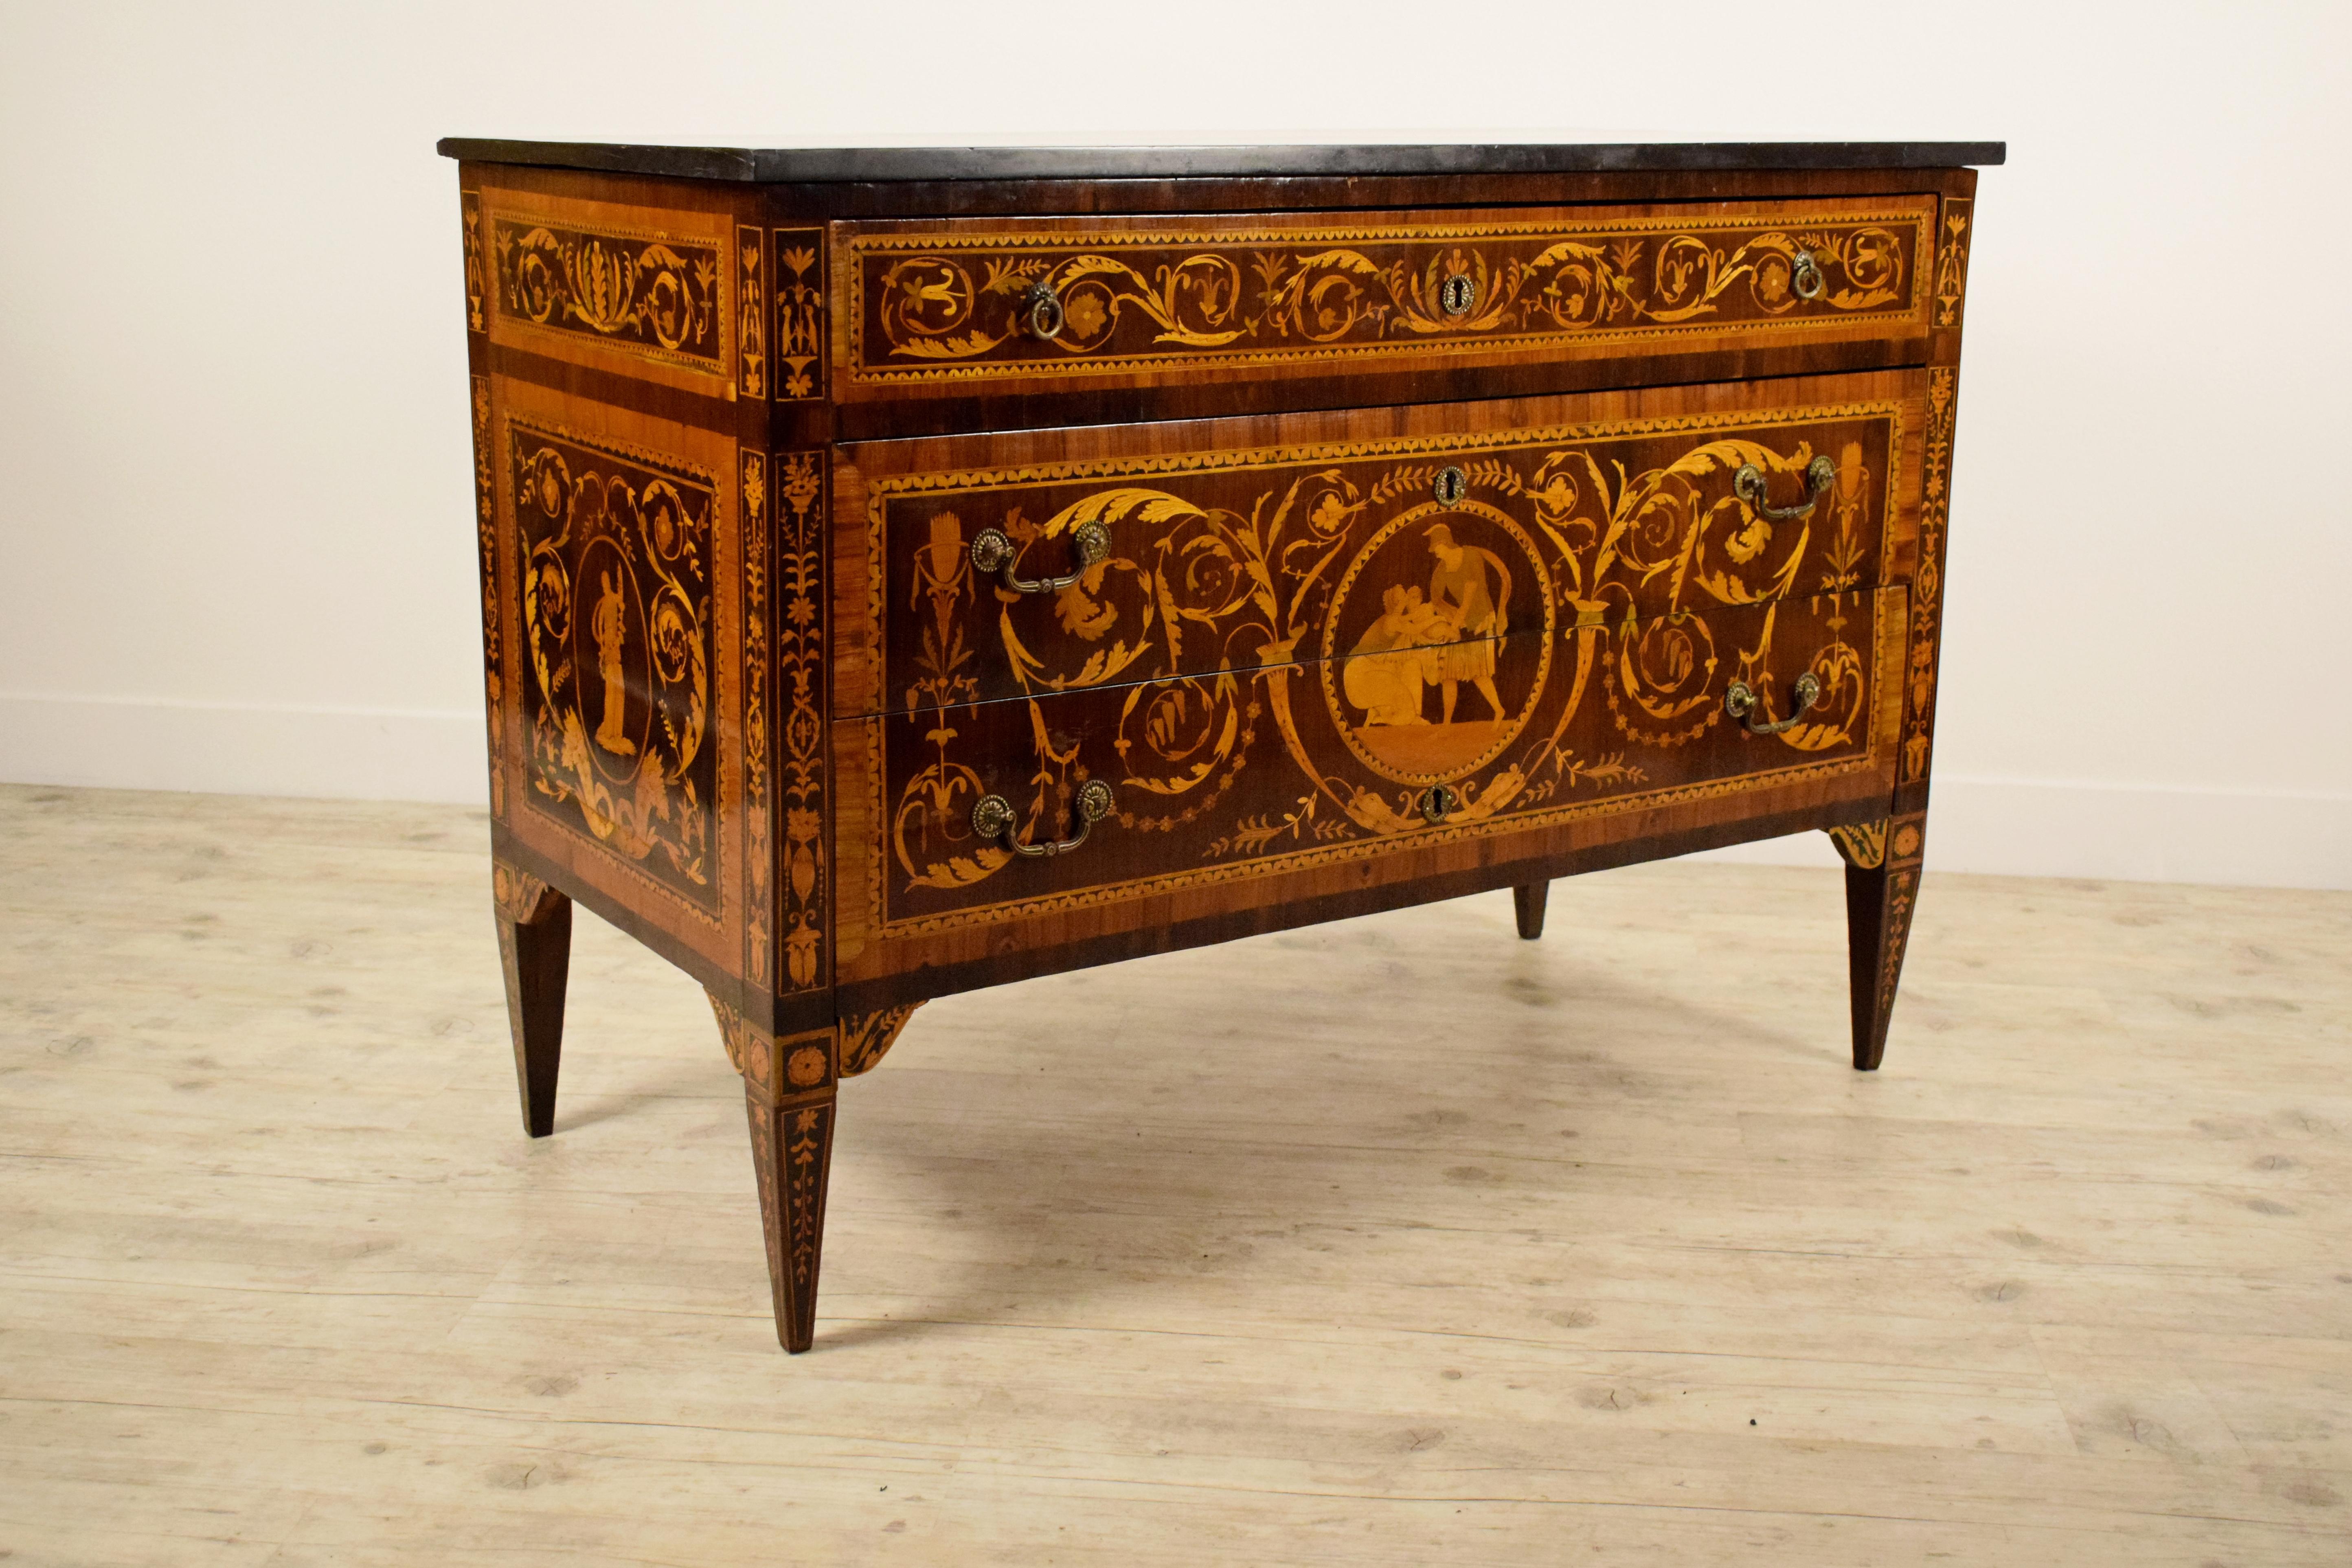 18th century, Italian neoclassical inlaid chest of drawers with marble top

This refined neoclassical chest of drawers was made in Lombardy, Italy, around the end of the 18th century. The cabinet has two large drawers and a smaller upper pull-bar.